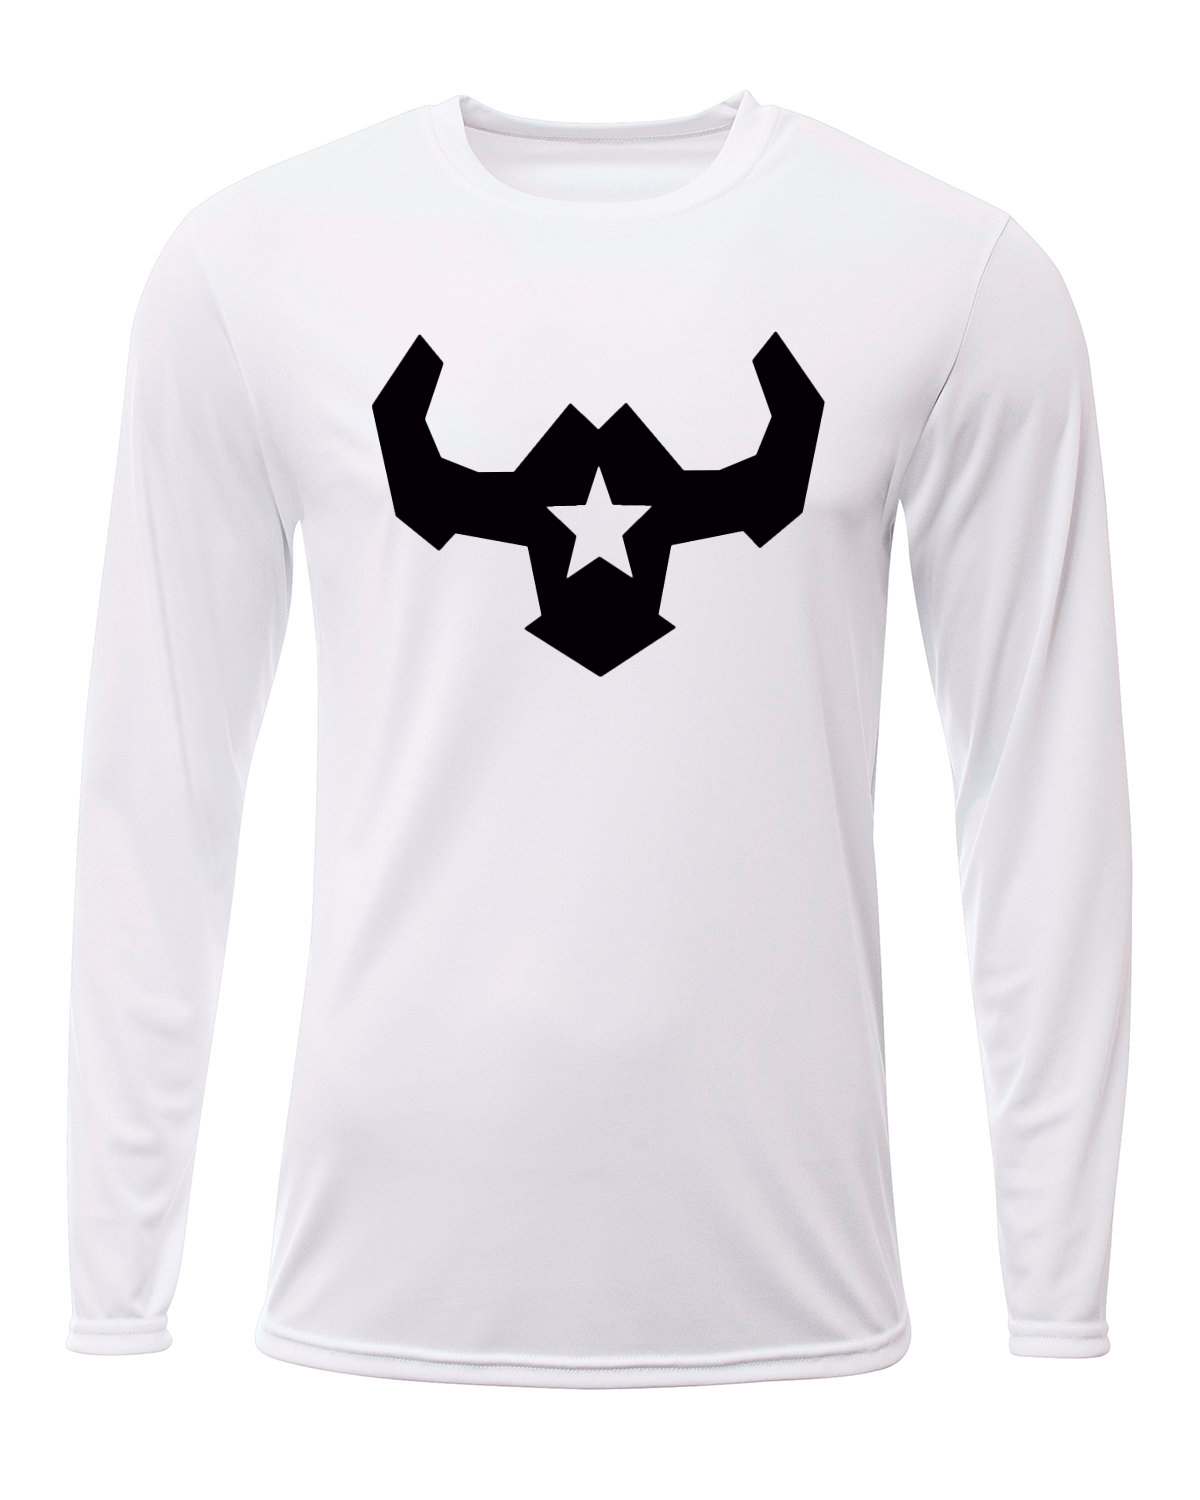 Affordable Custom Apparel Long Sleeve High Performance White VQRO Shirt Affordable Apparel and Hats